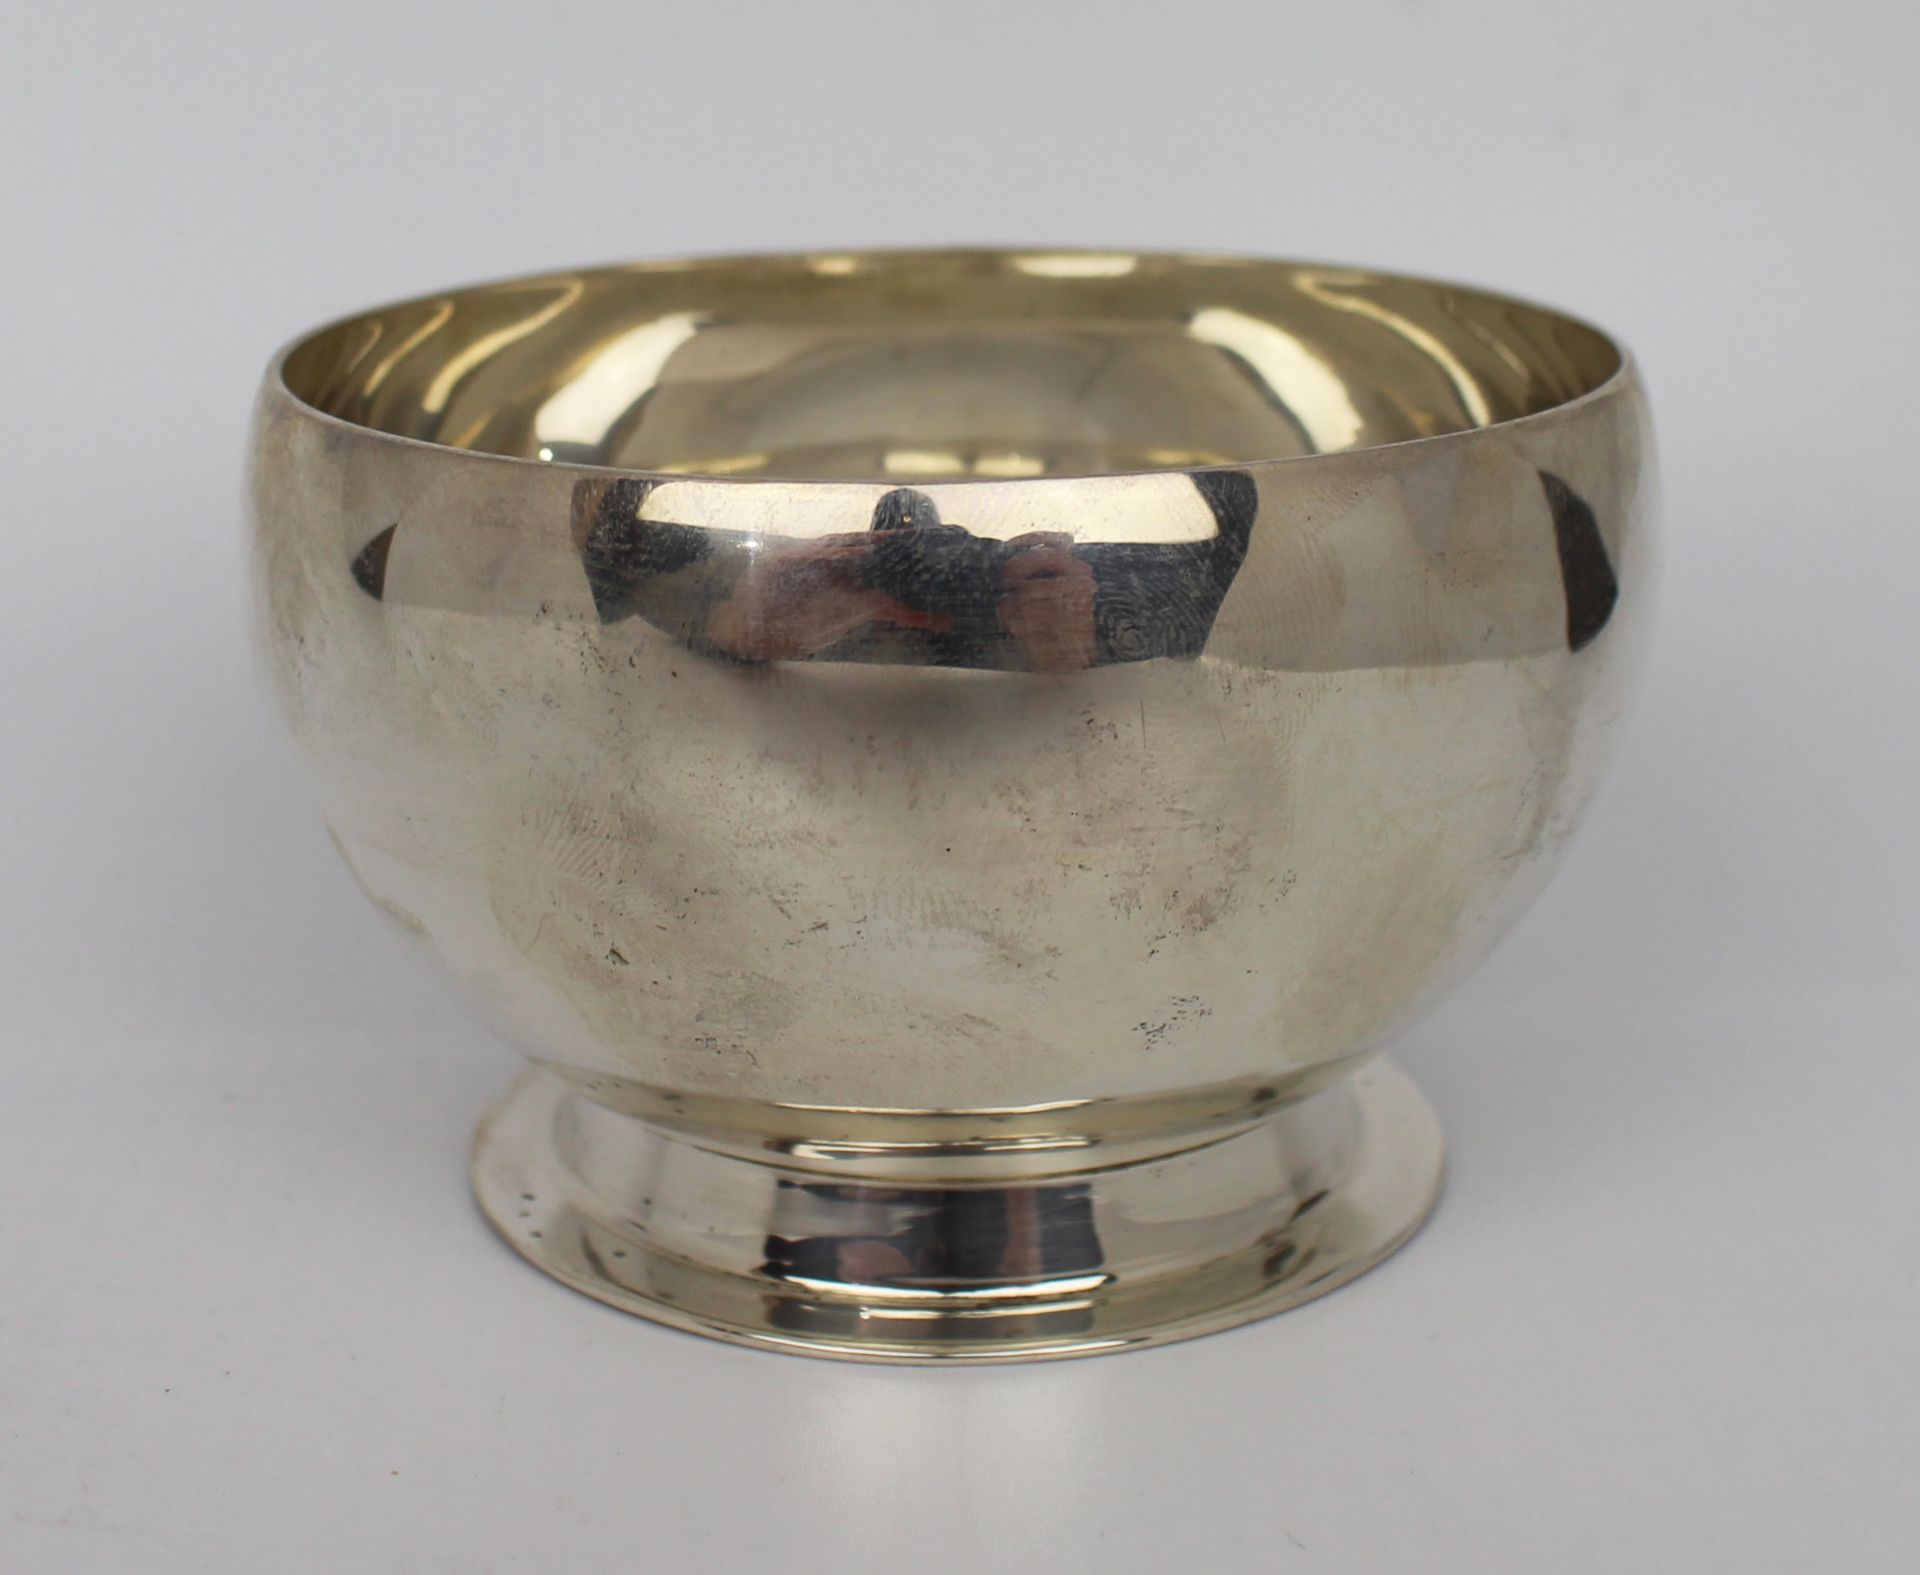 Solid Silver Bowl by Harrods London 1939 - Image 2 of 4